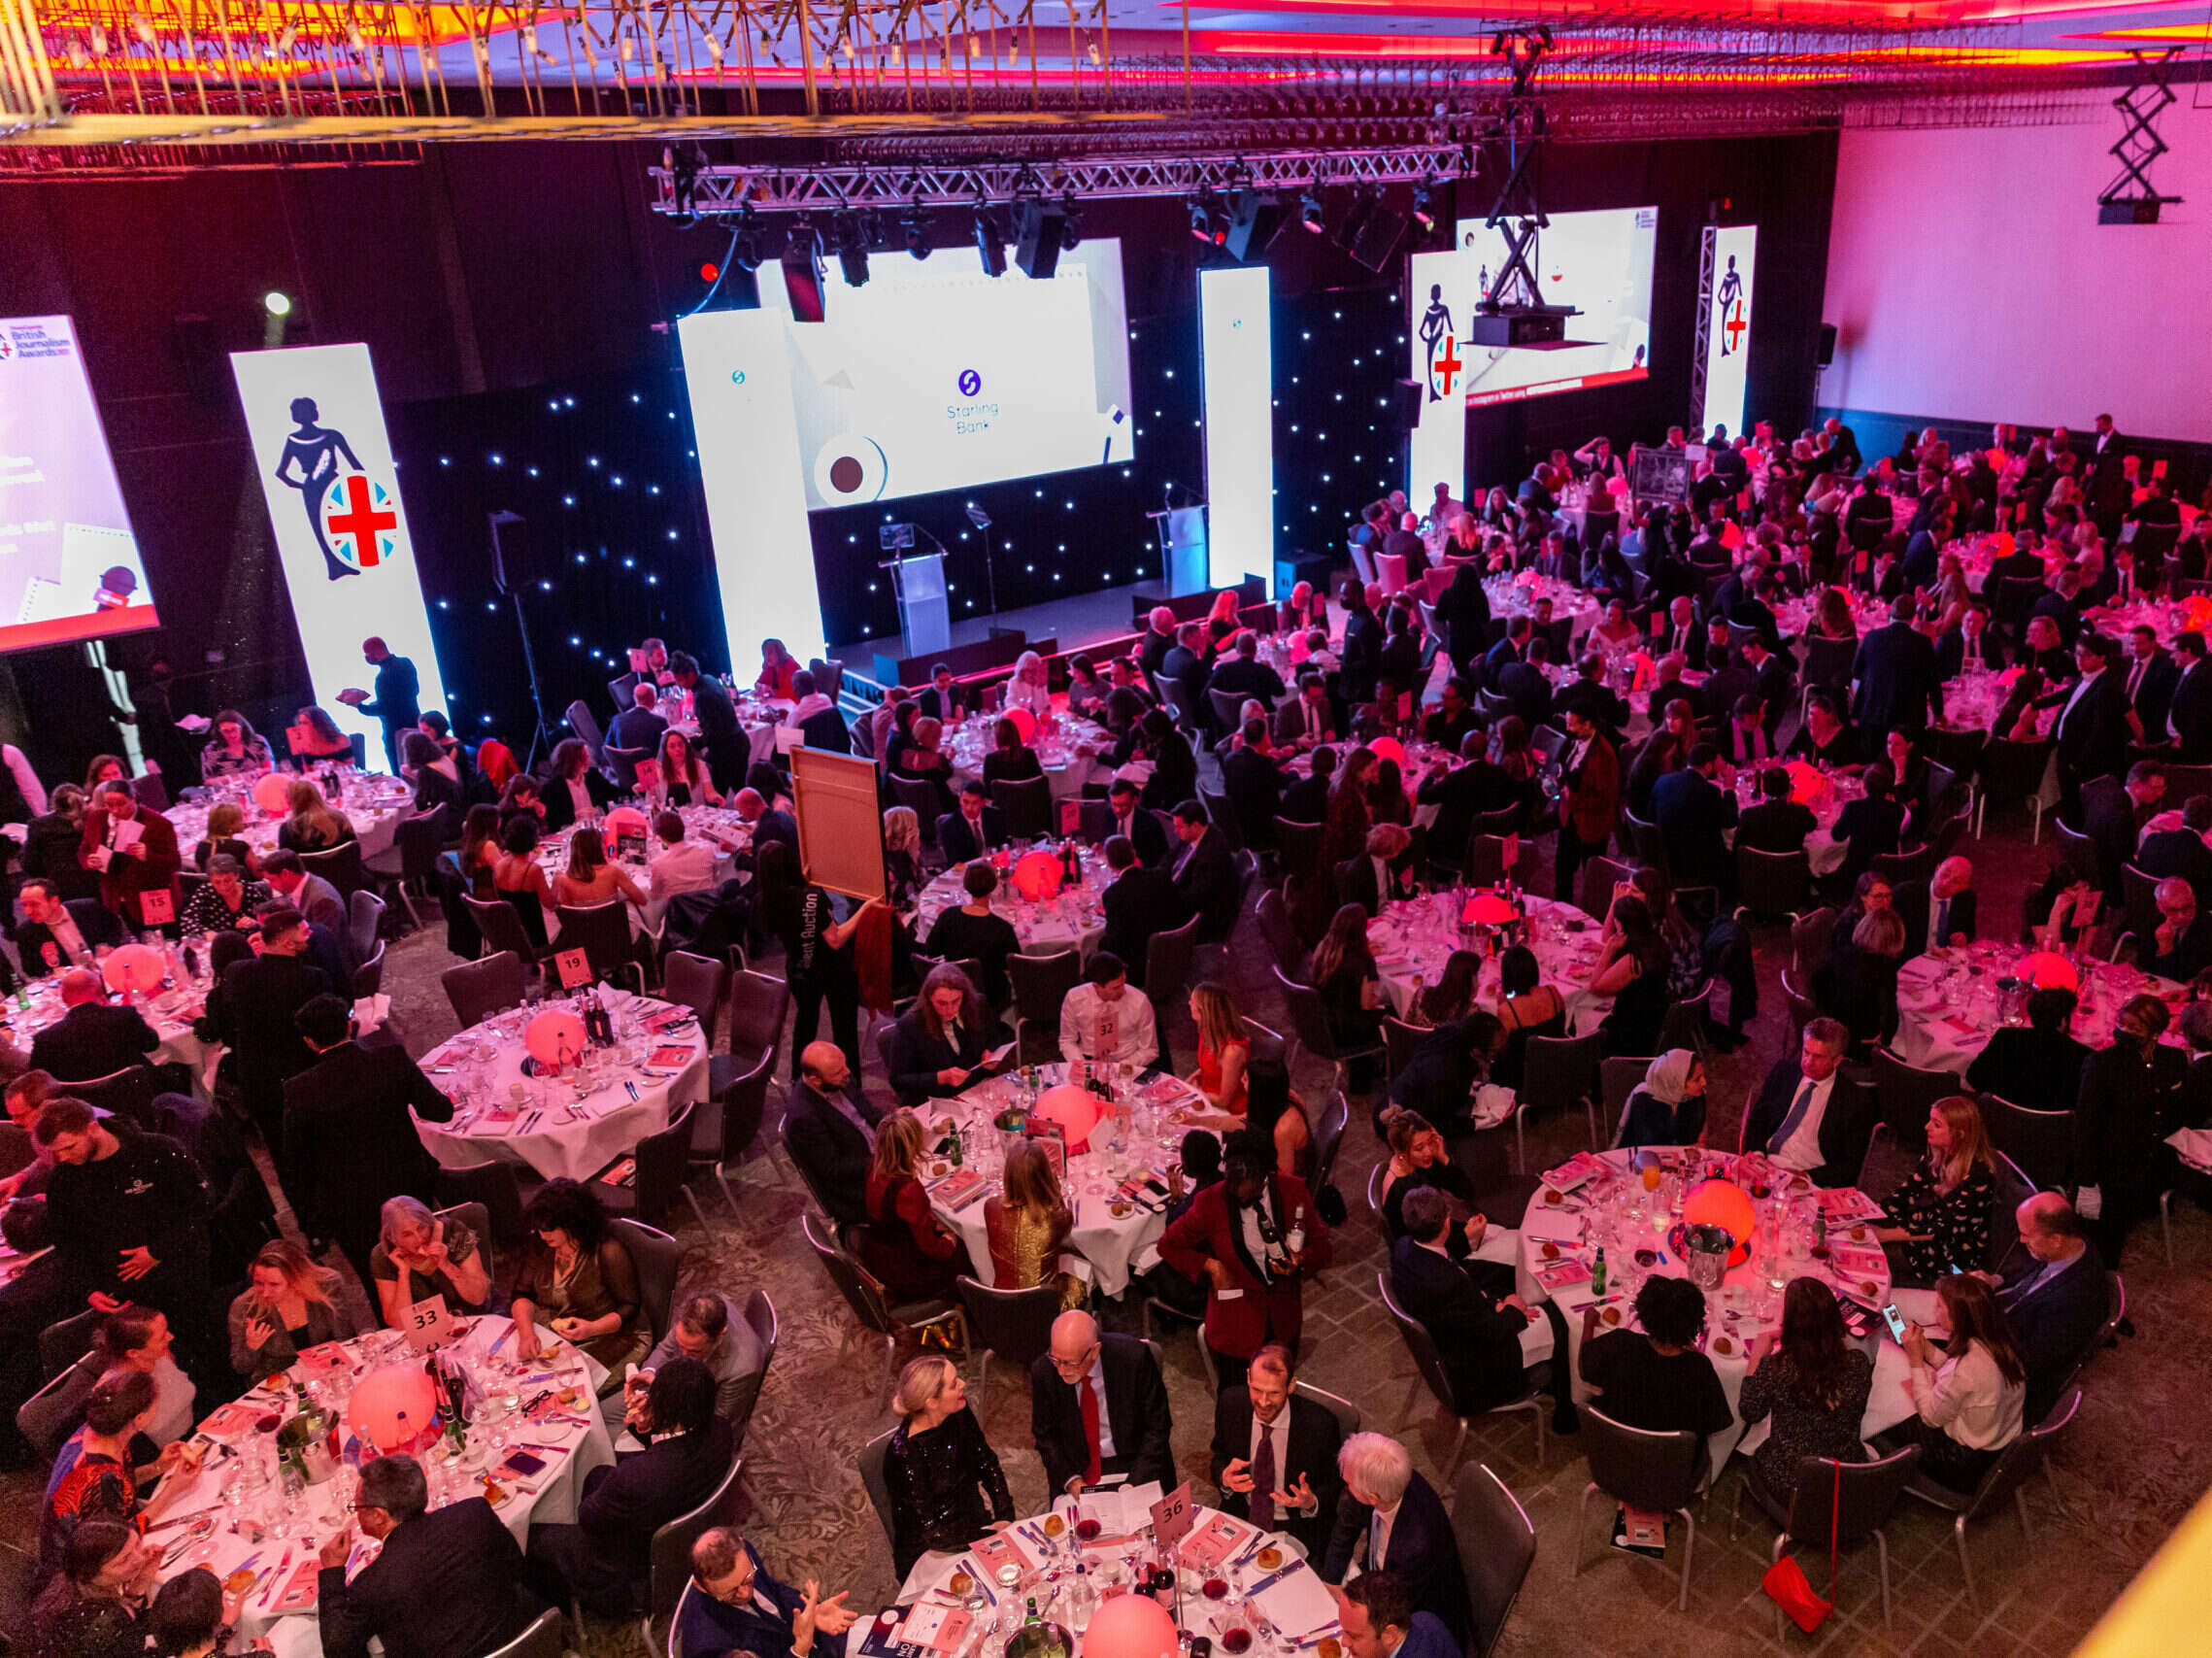 British Journalism Awards 2022 launched: Event bigger than ever